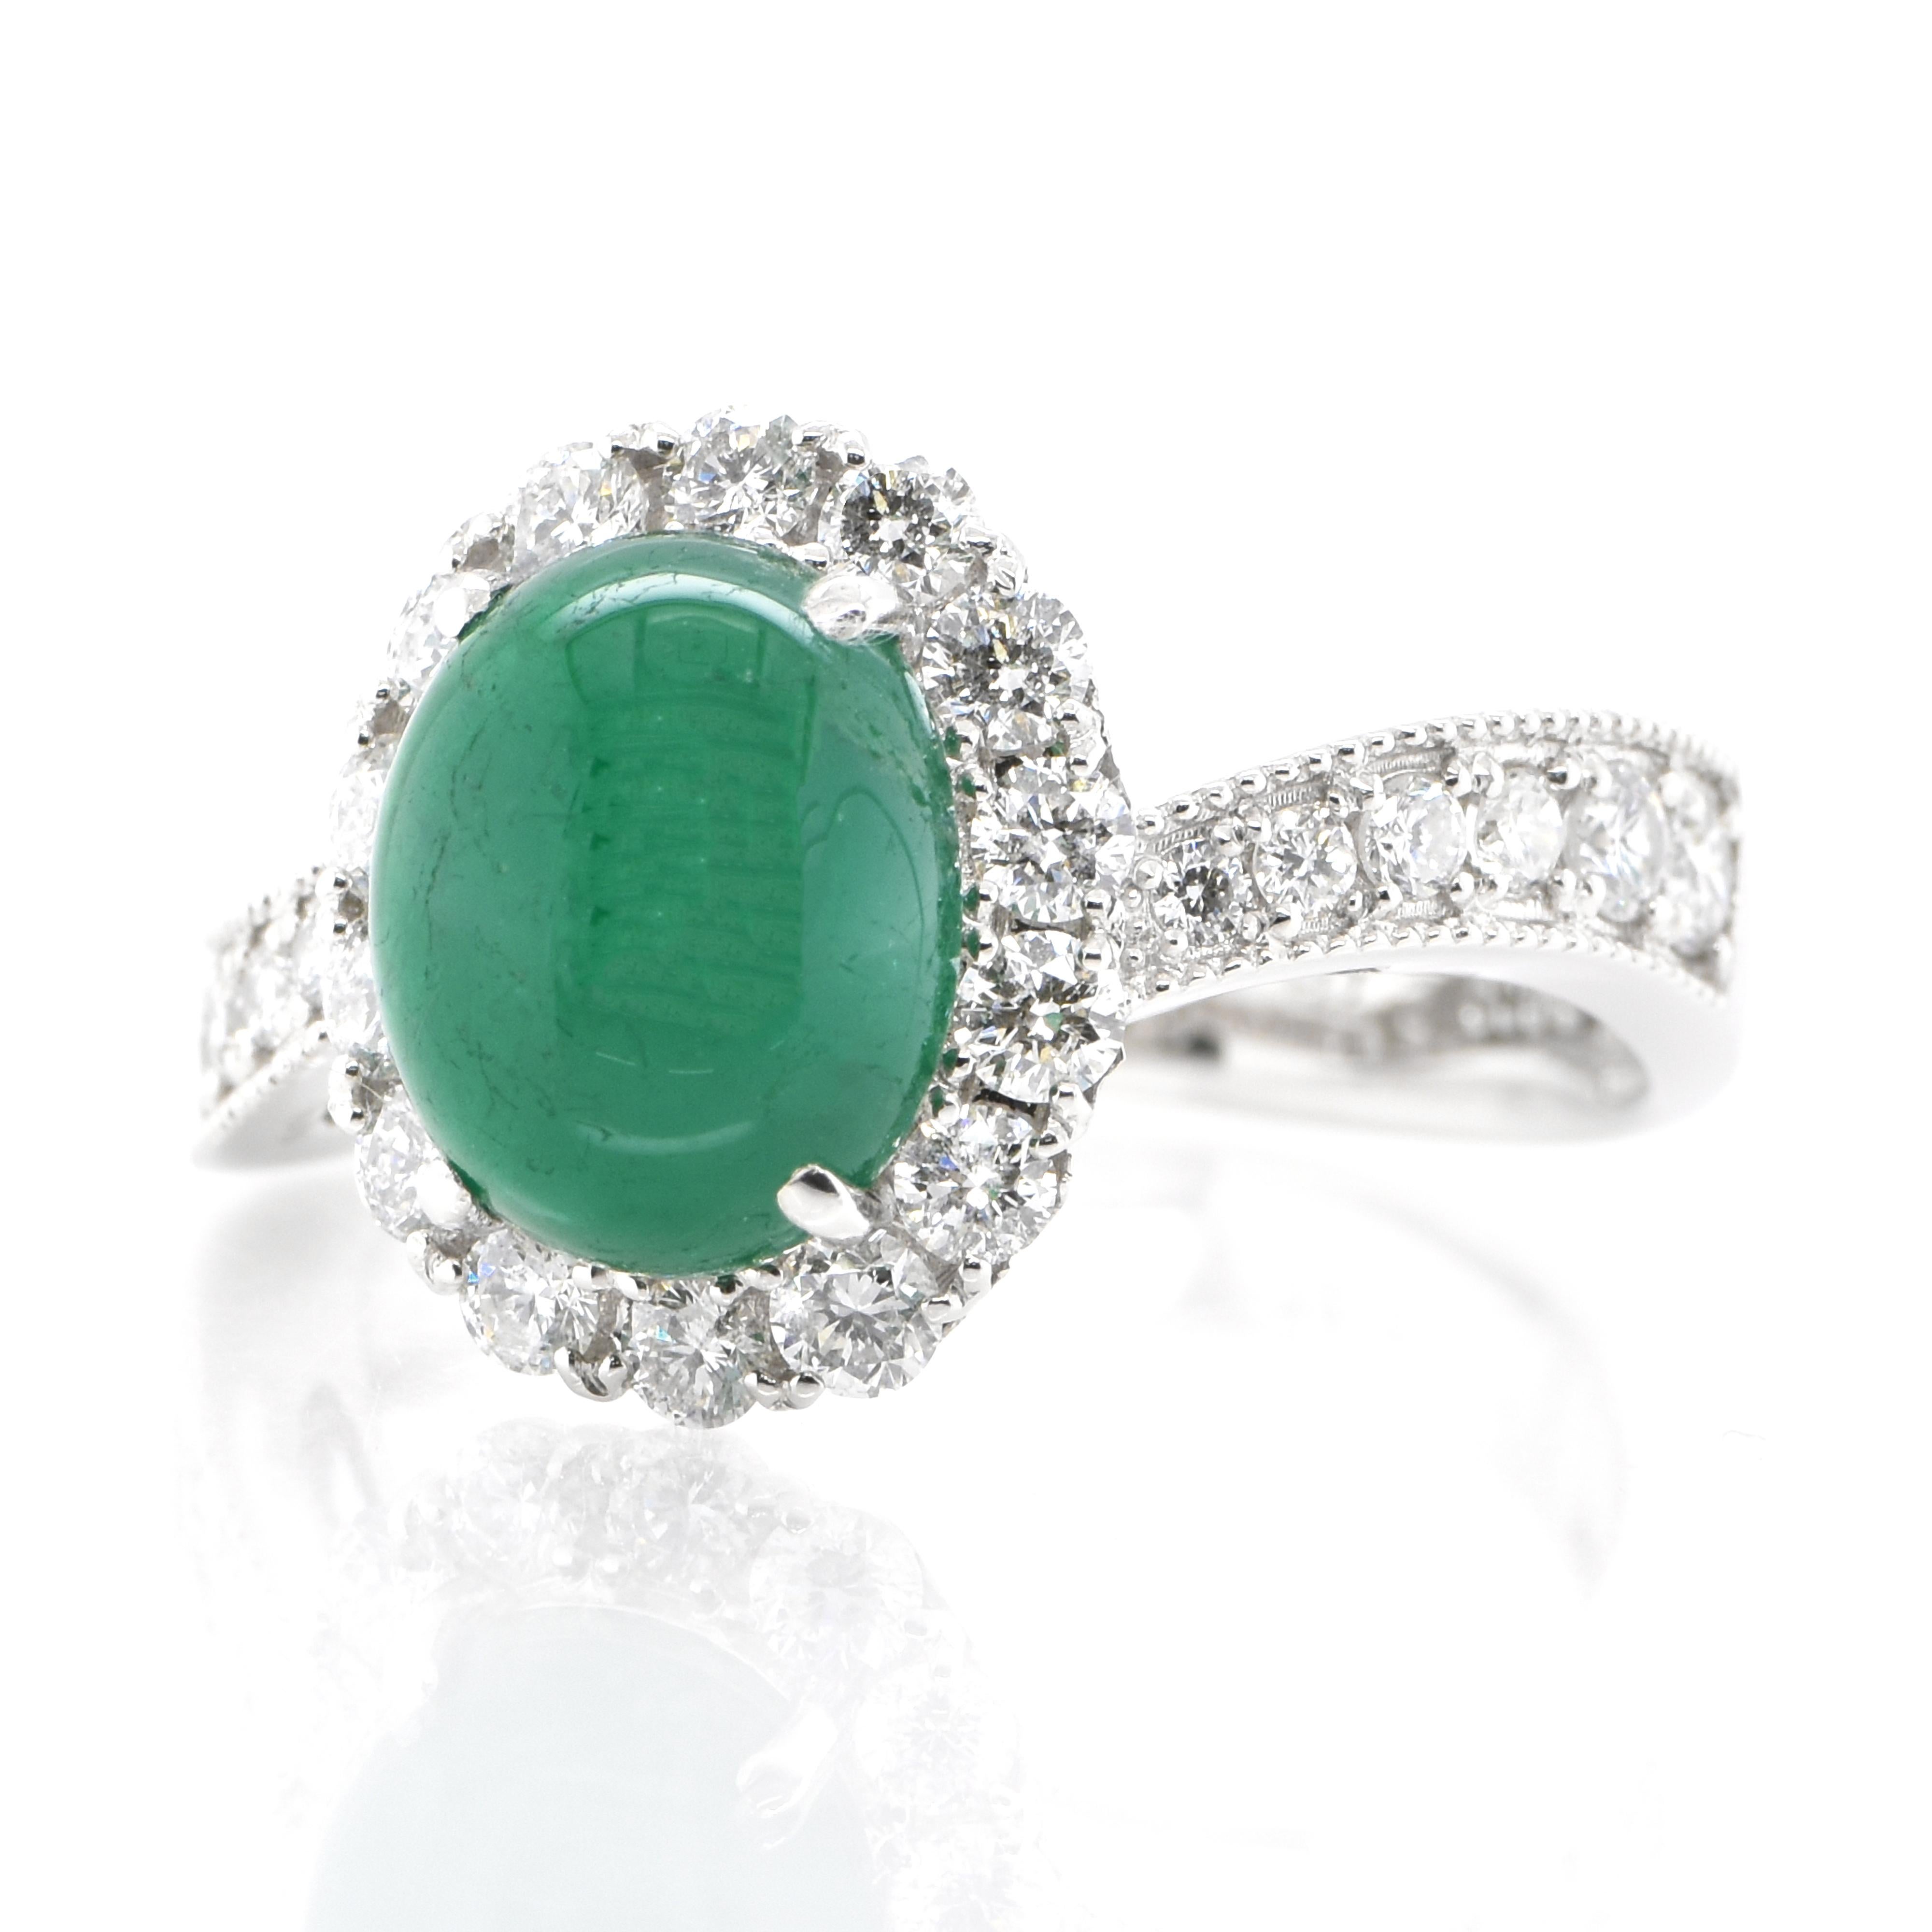 A stunning ring featuring a 2.70 Carat Natural Emerald Cabochon and 0.82 Carats of Diamond Accents set in Platinum. People have admired emerald’s green for thousands of years. Emeralds have always been associated with the lushest landscapes and the